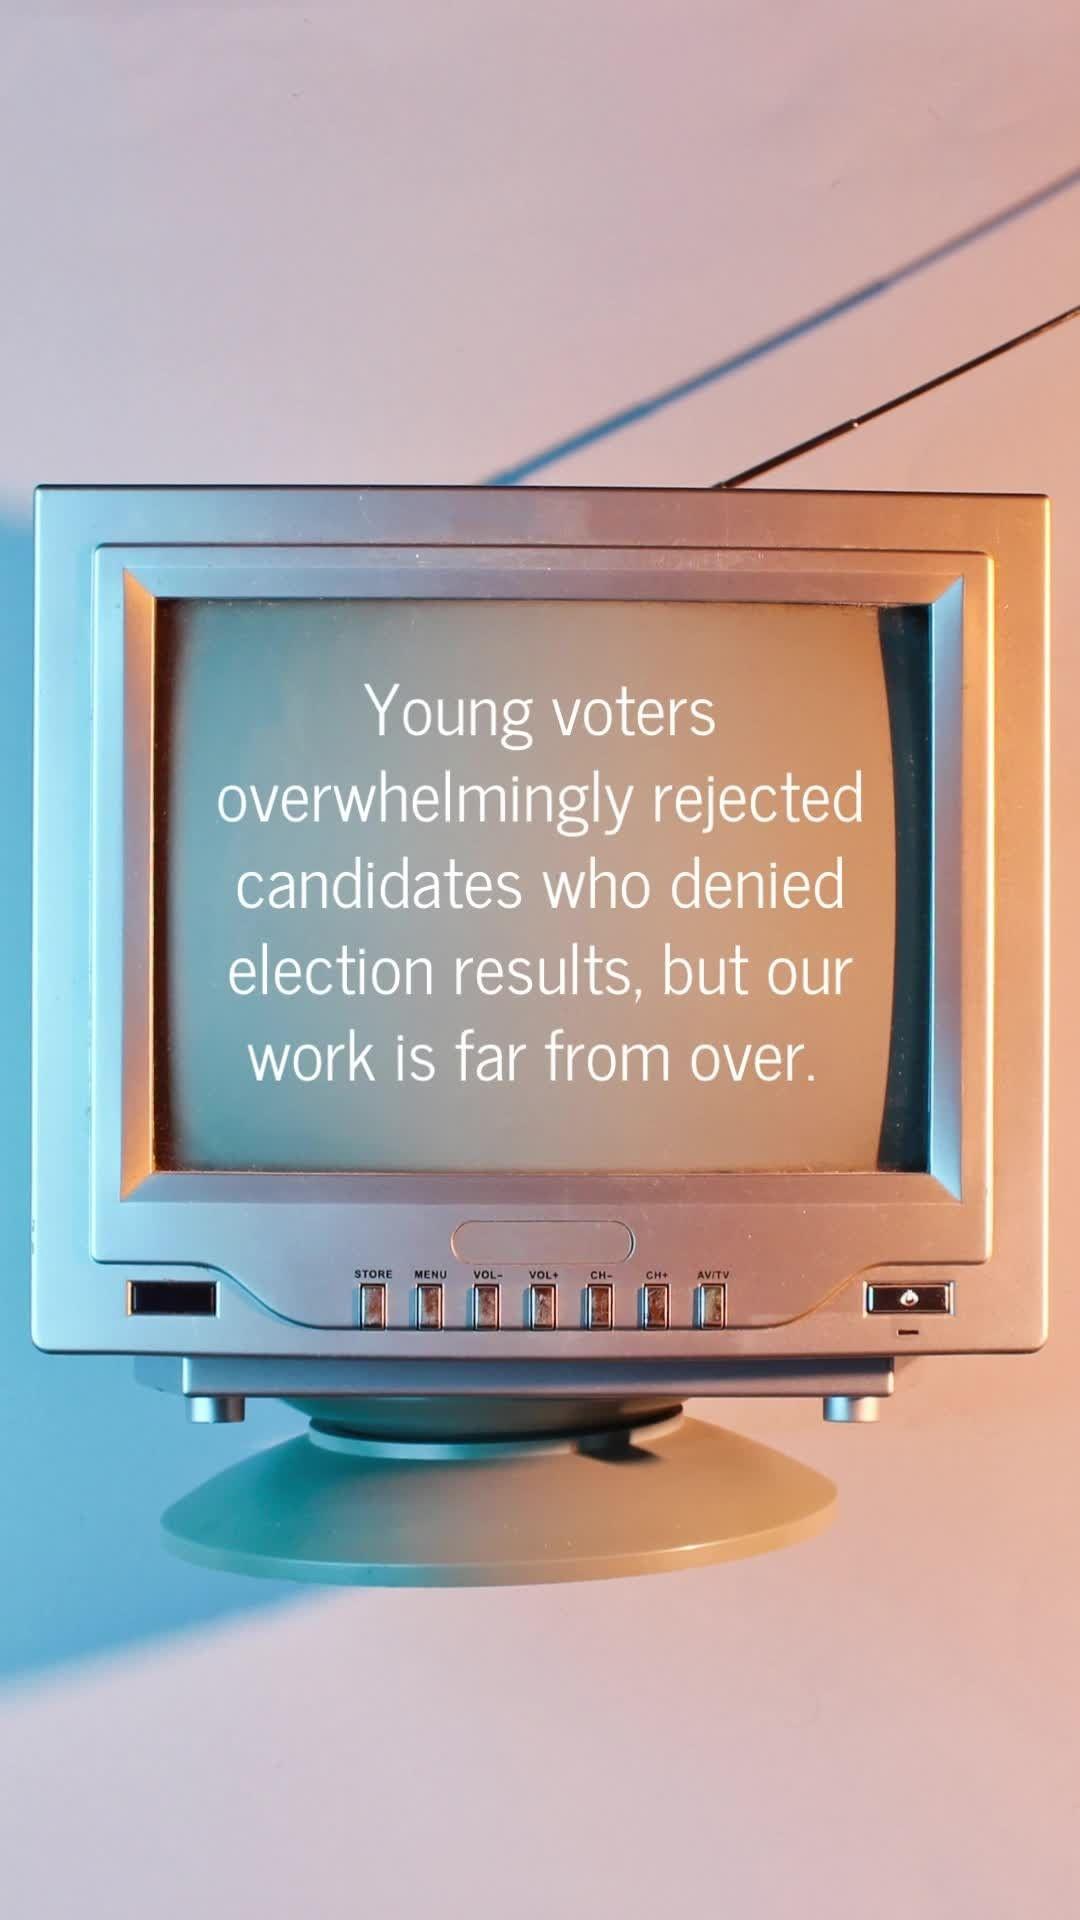 class="content__text"
 One thing about #GenZ? They are not buying into that election fraud propaganda! 🚫

Our work isn't over yet, though! Since the results from the 2022 Midterms rolled in, voter-restrictive legislation has rolled out! 🙄 

When they can't deny the outcome, they try to change it by suppressing votes. We can't let that happen! 

 #RockTheVote #YouthVote #VotingRights 
 